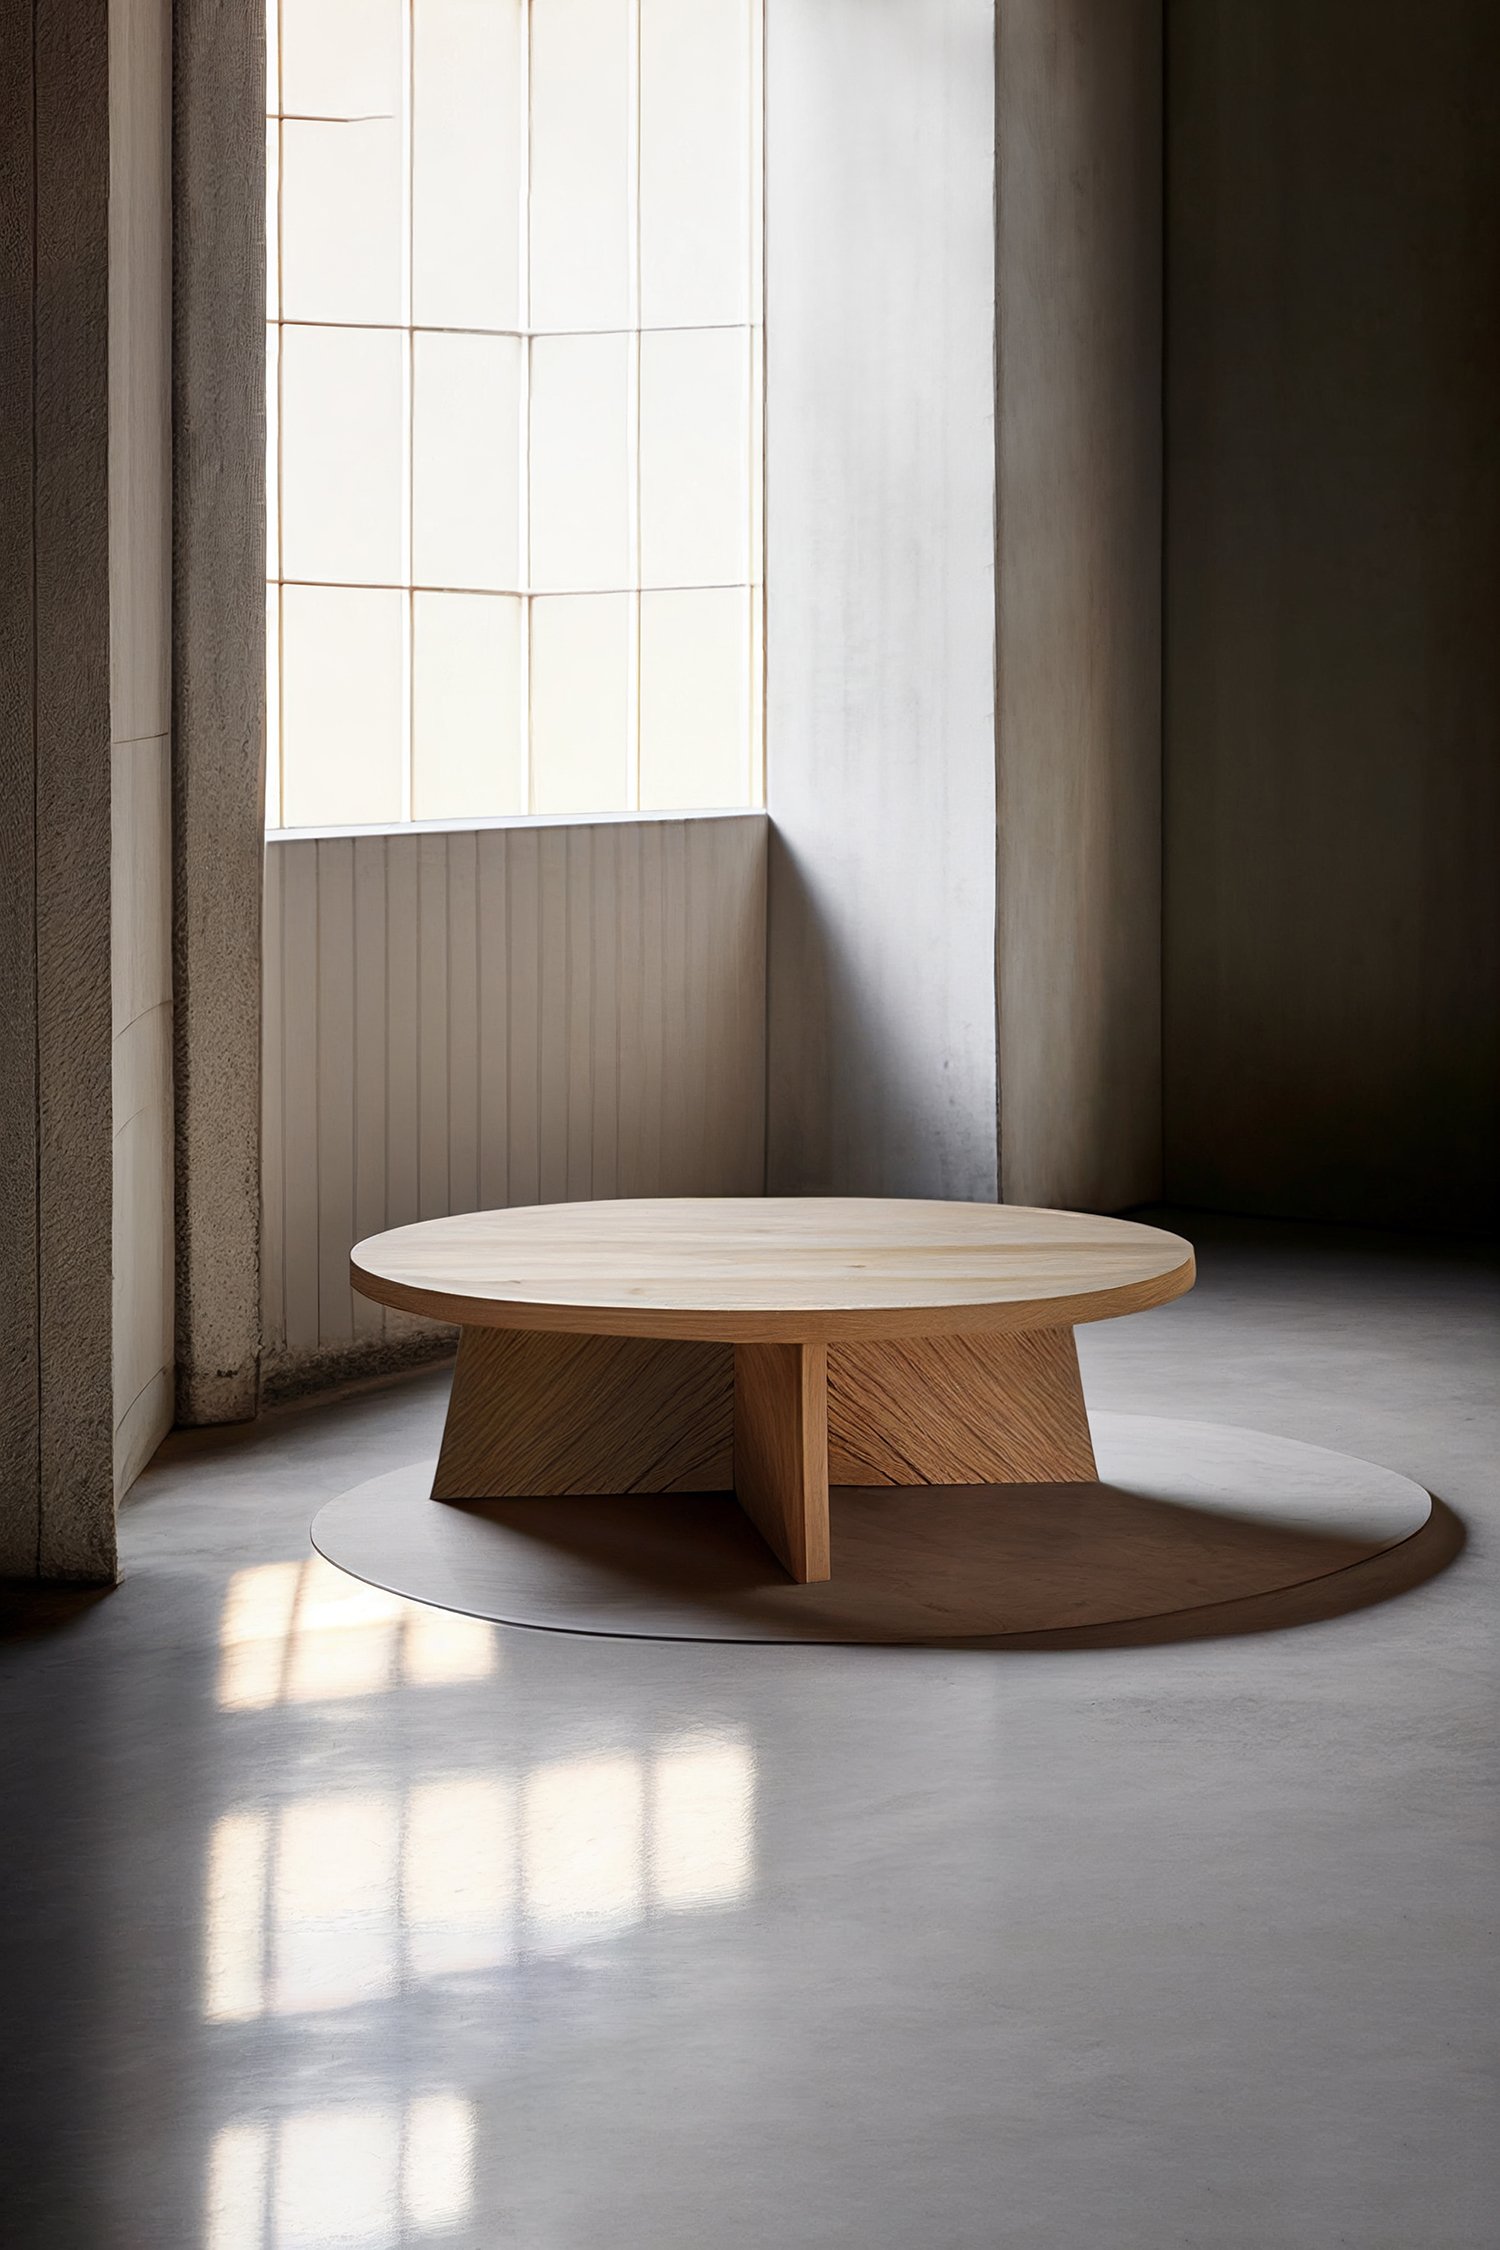 Cruciform Pyramid Base Solid Wood Round Table By NONO 3.jpg